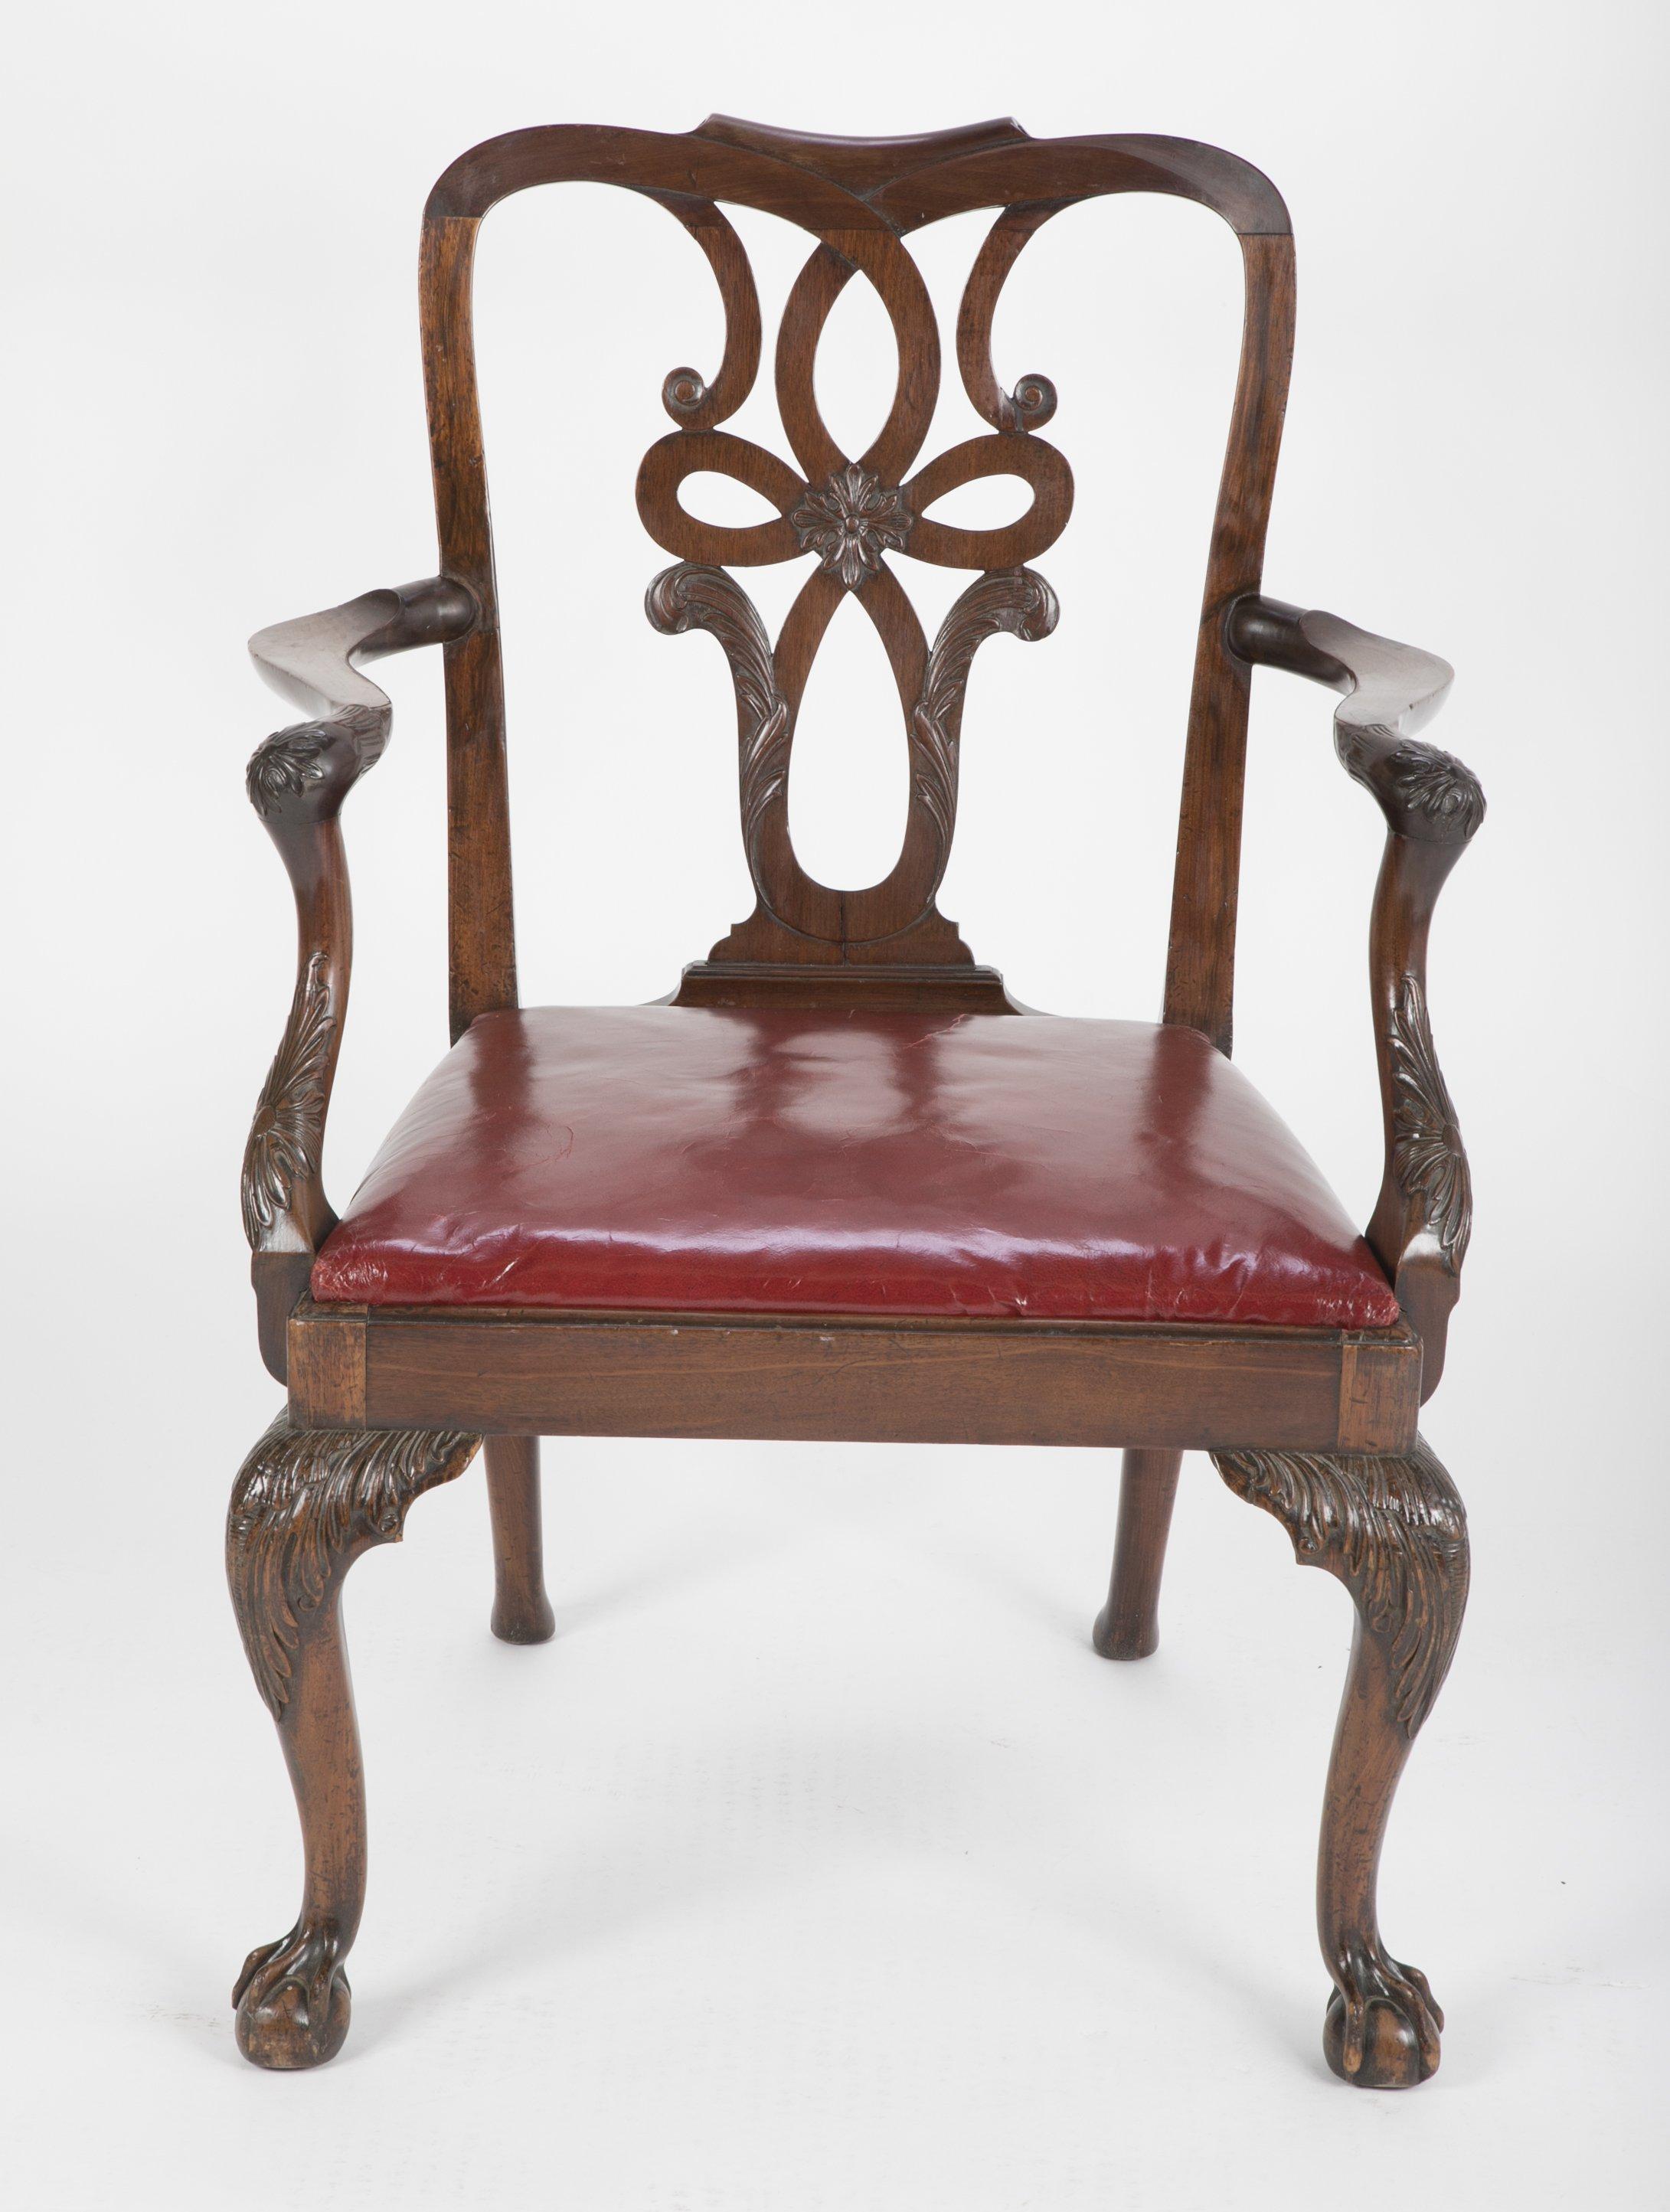 An English George II mahogany armchair with carved ball and claw slip seat armchair with a carved splat, knees, and arms.


We are proud of our long-standing partnership with George N Antiques who specializes in fine authentic antique furniture and